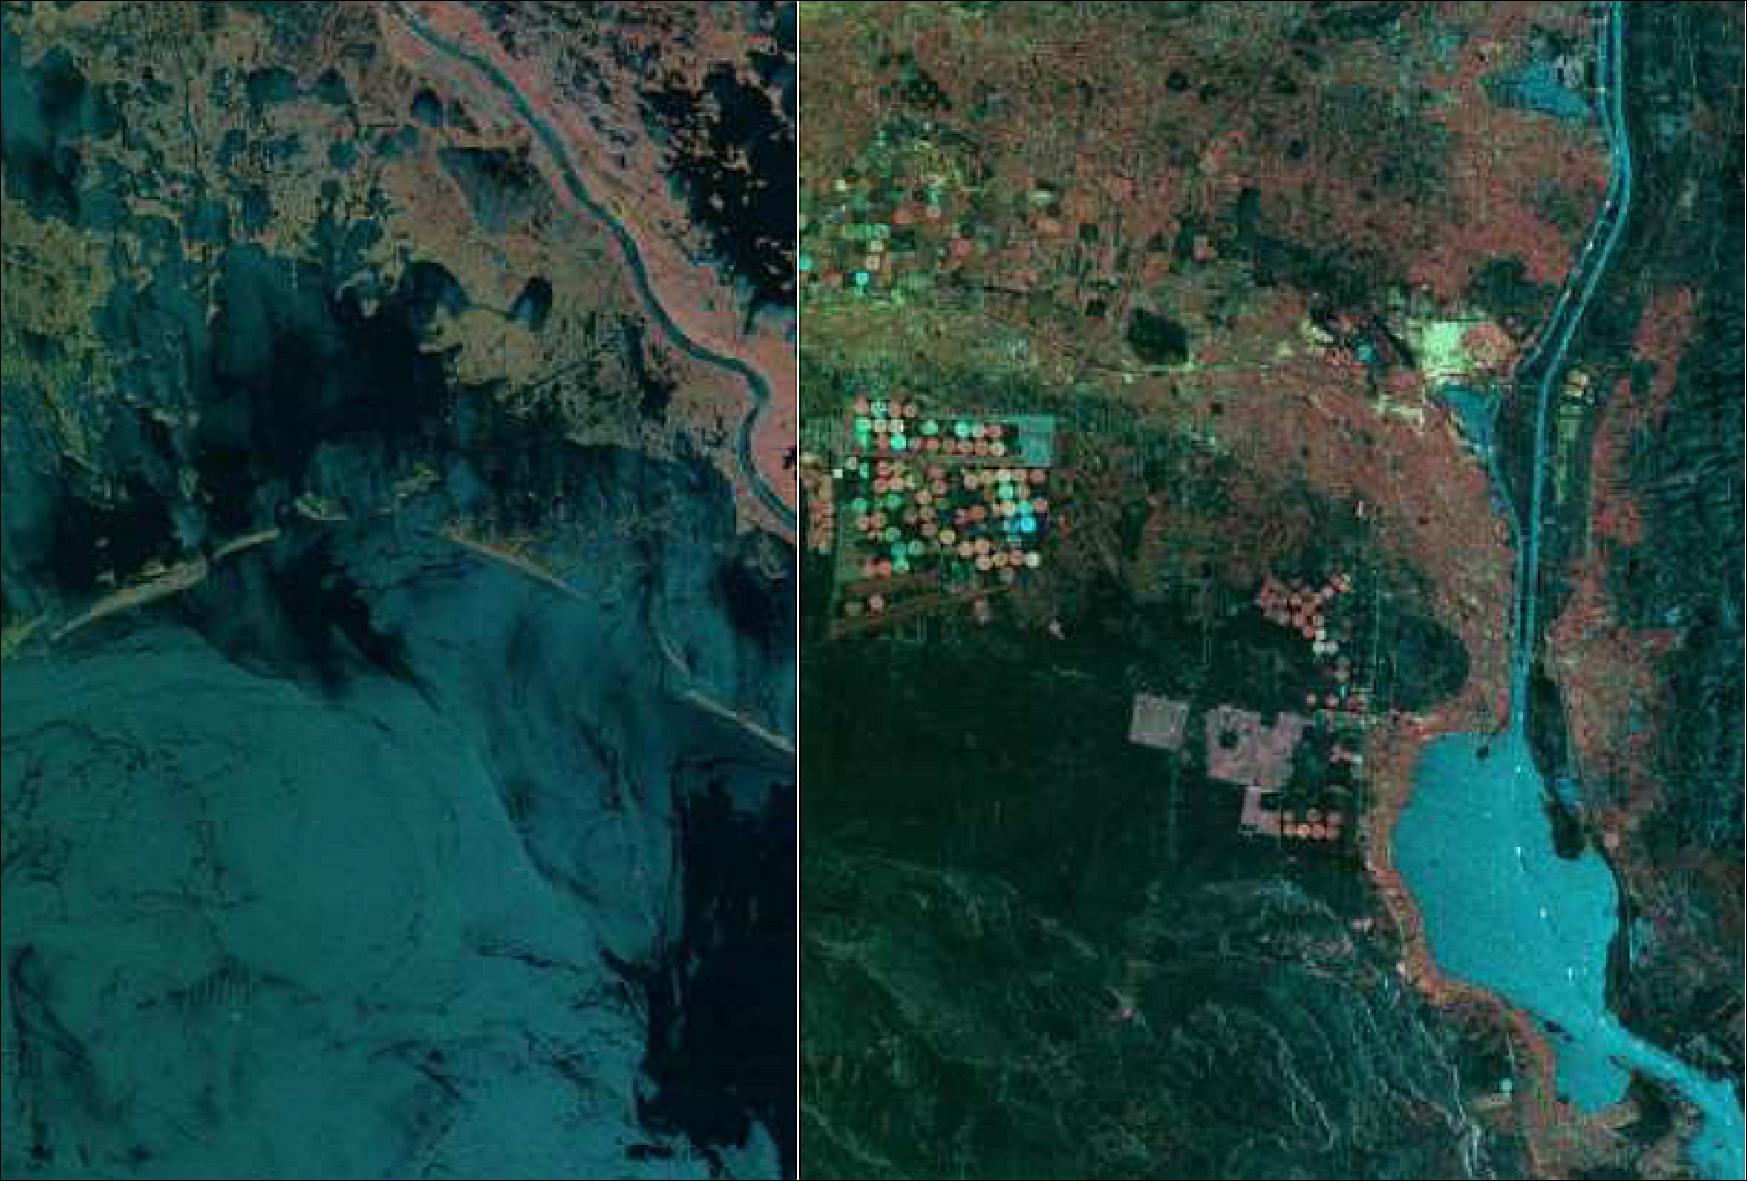 Figure 9: Left: NovaSAR multi-polar images Mississippi Delta and gulf of Mexico, Right: Suez Canal and red Sea 30 m resolution Alt-Pol scanSAR with HH green, VV blue, HV red (image credit: SSTL)